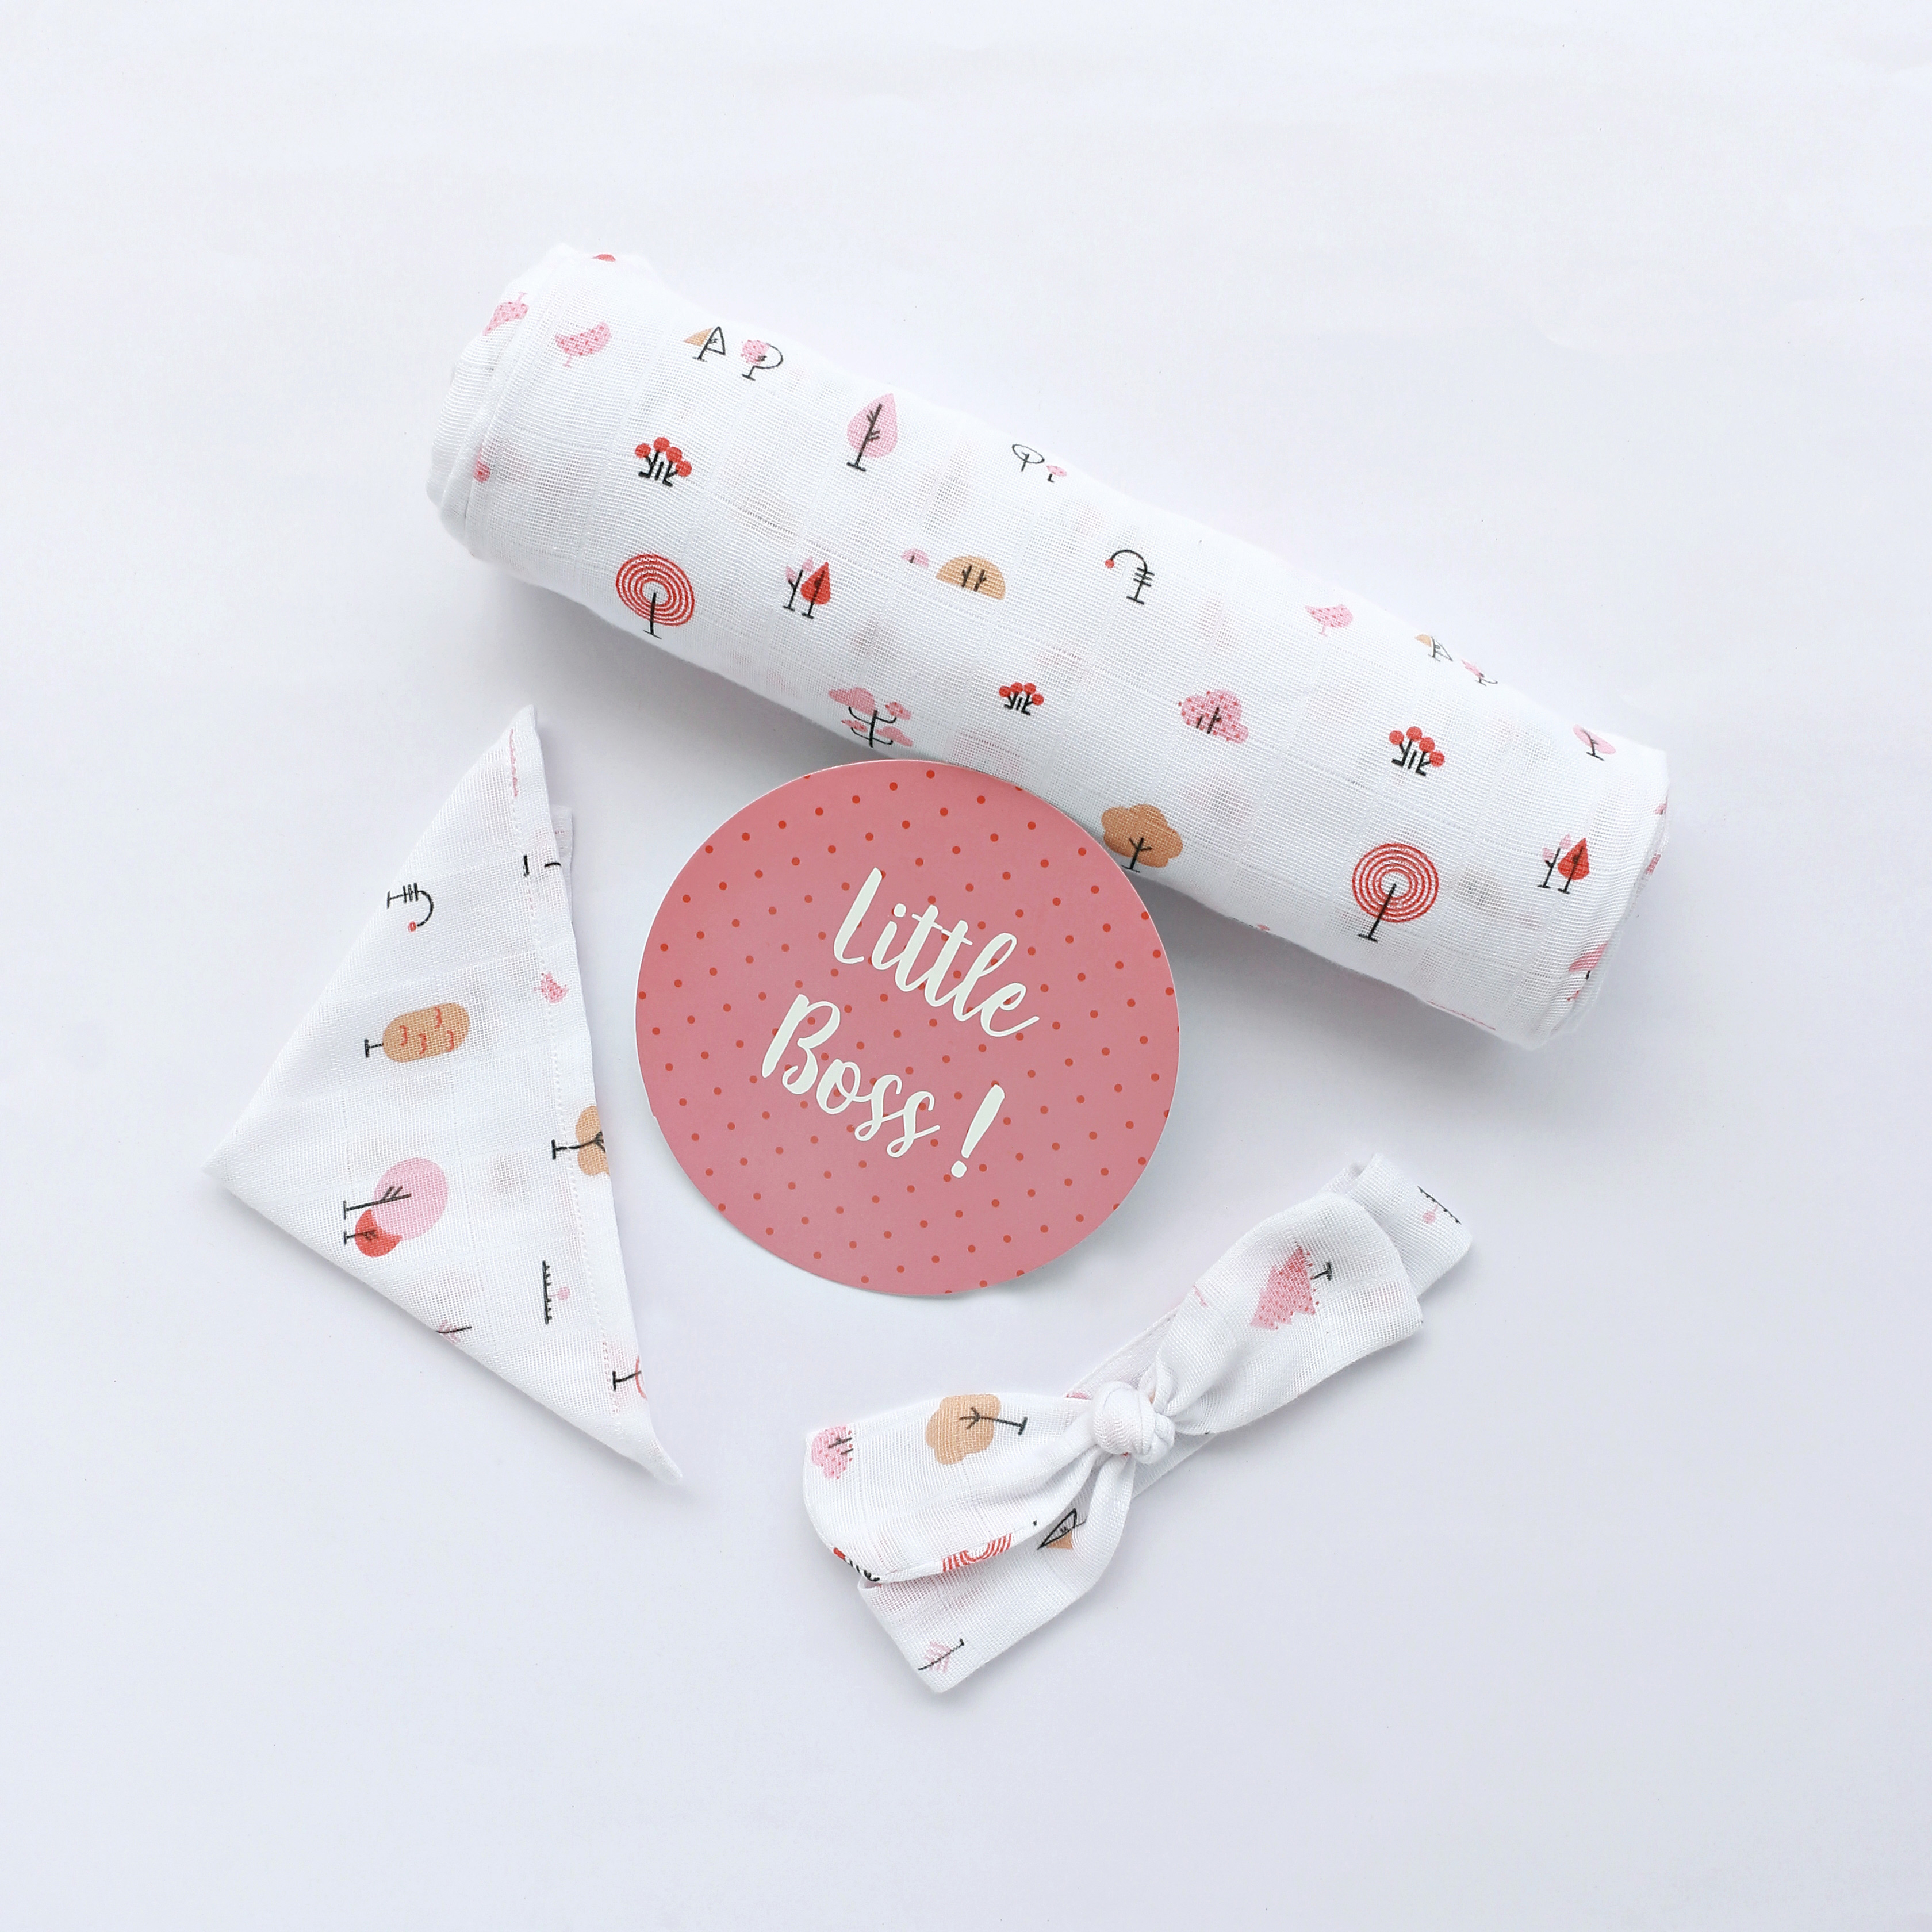 Fantasy Tree World  -  Organic Cotton ( double layer ) Baby Muslin Swaddle/ Blanket - 110 X 110 cms